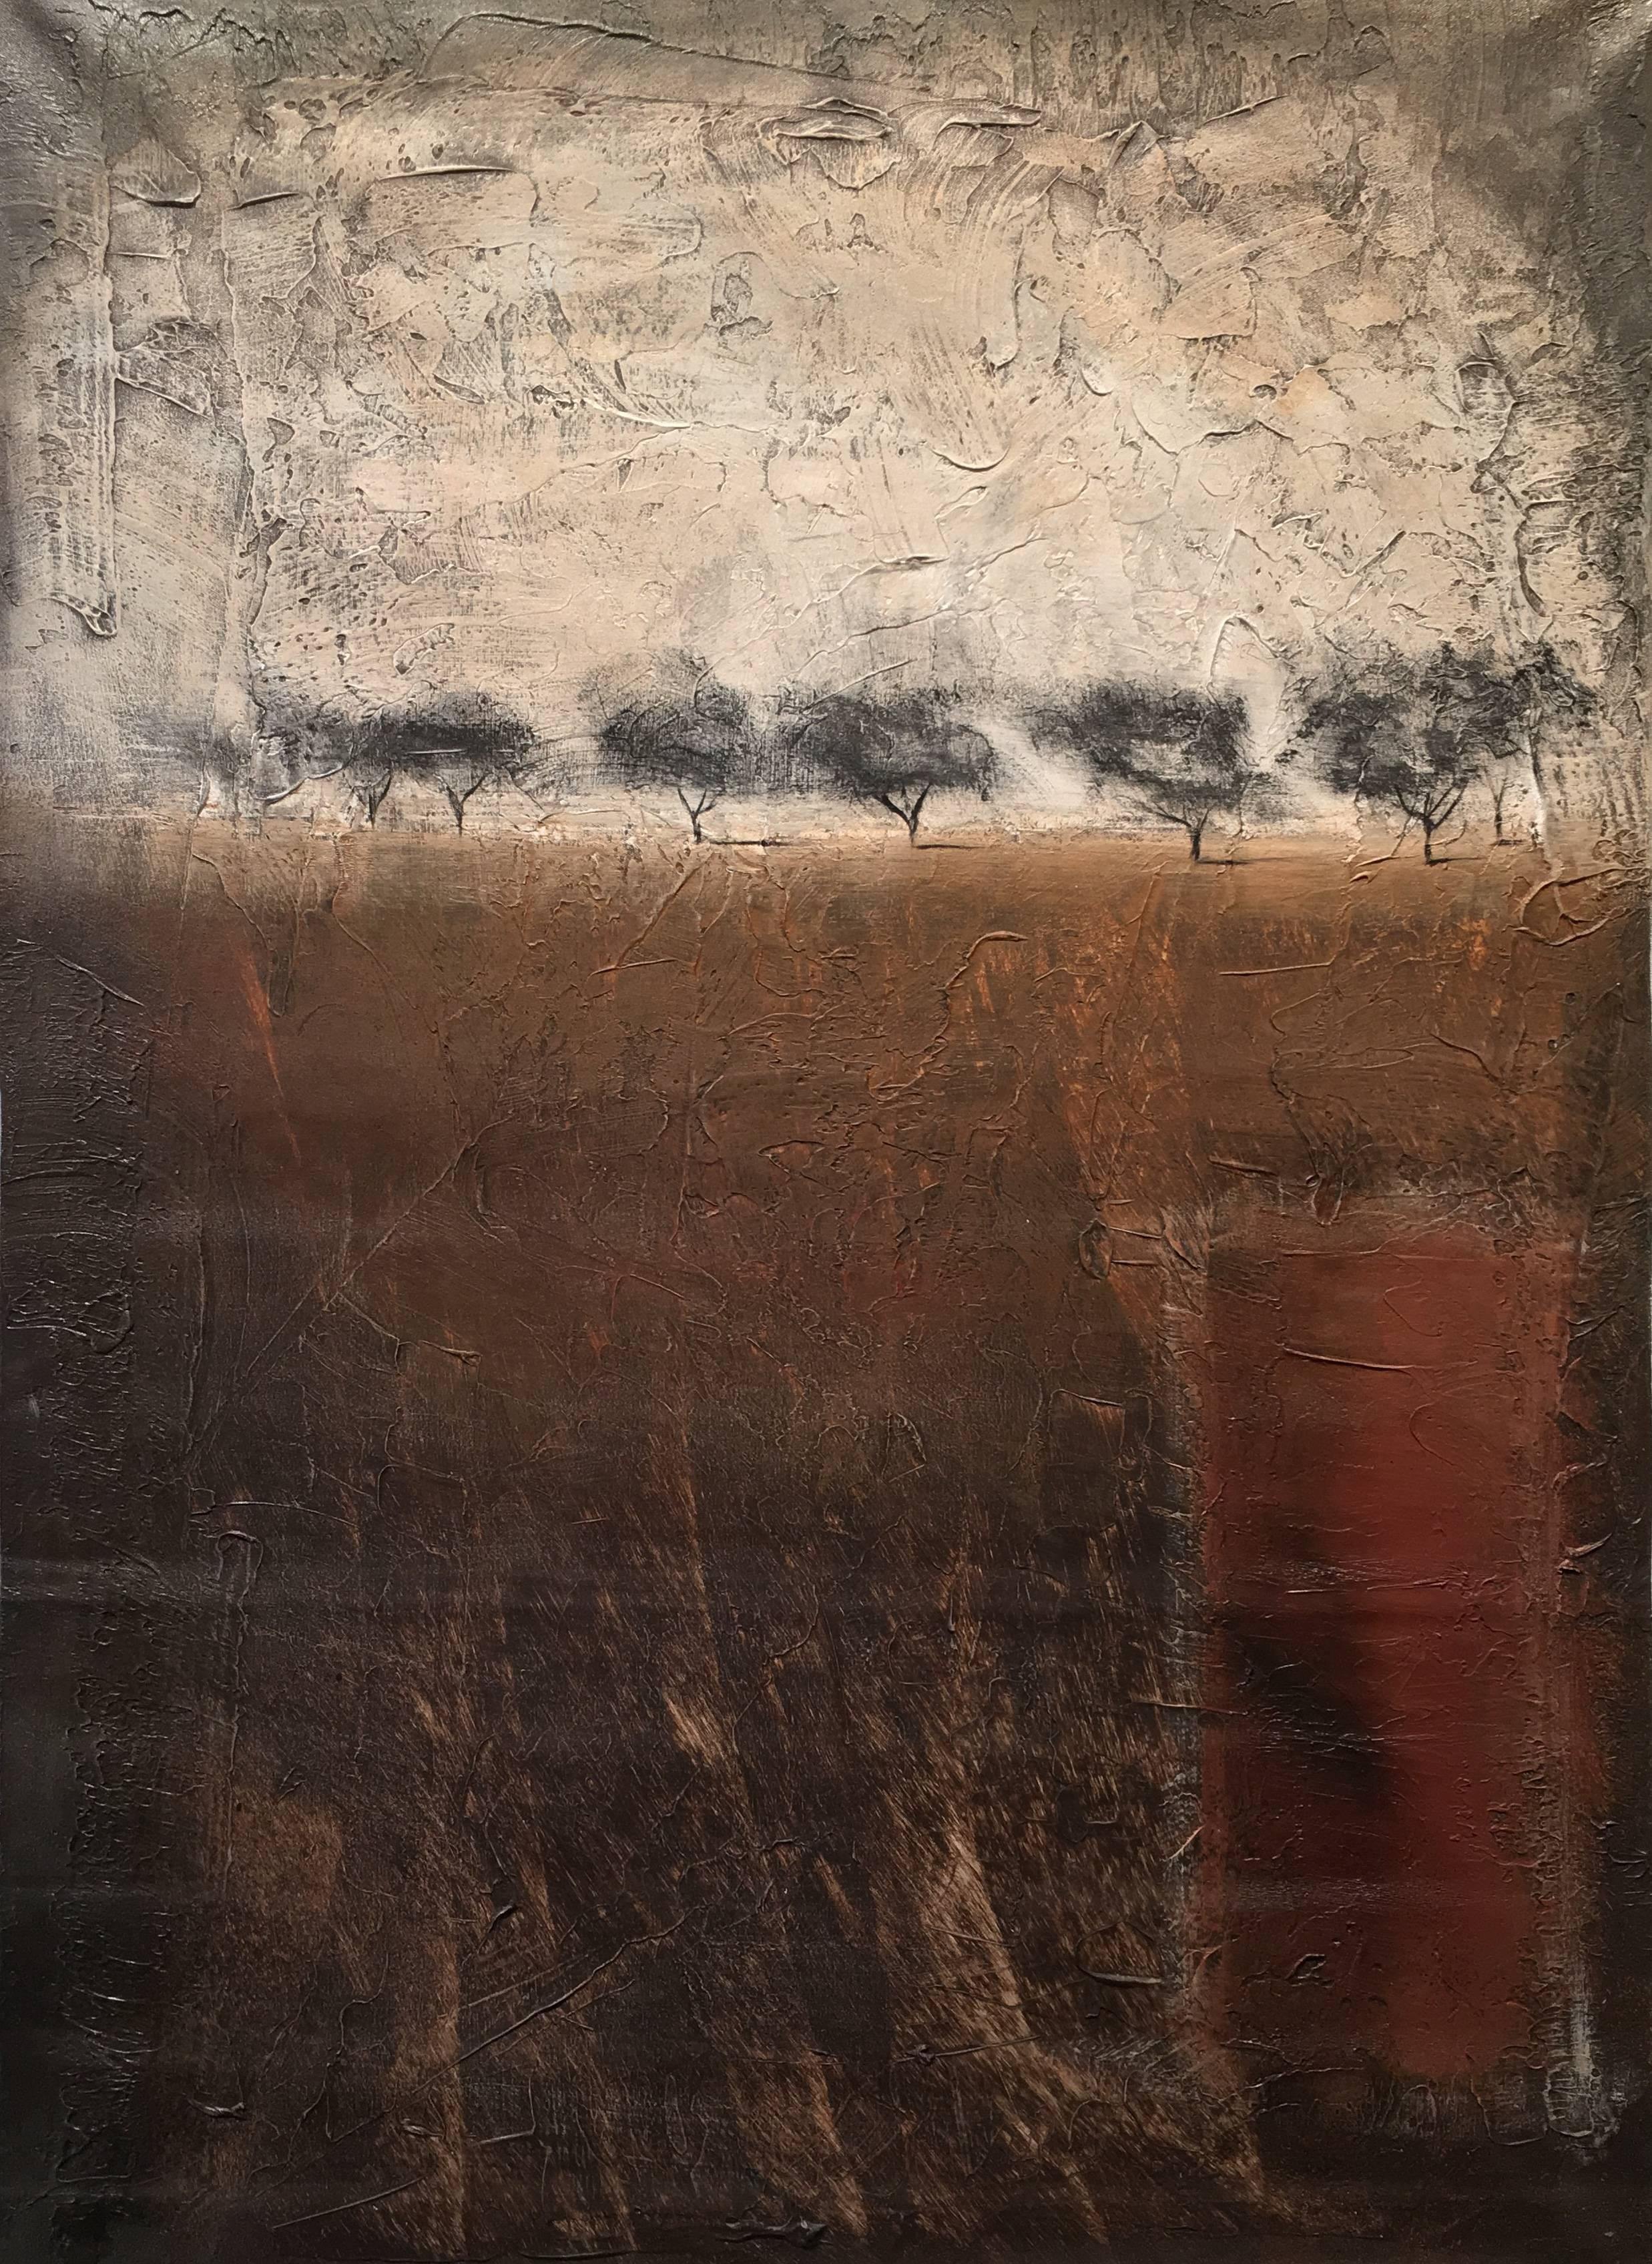 Contemporary landscape painting by artist, Shane Townley. Thick textured oil paintings on canvas. Great mid century style. Canvas comes fully stretched on 1 1/2in thick canvas, unframed and painted edges. Perfect piece for any collection.

Shane